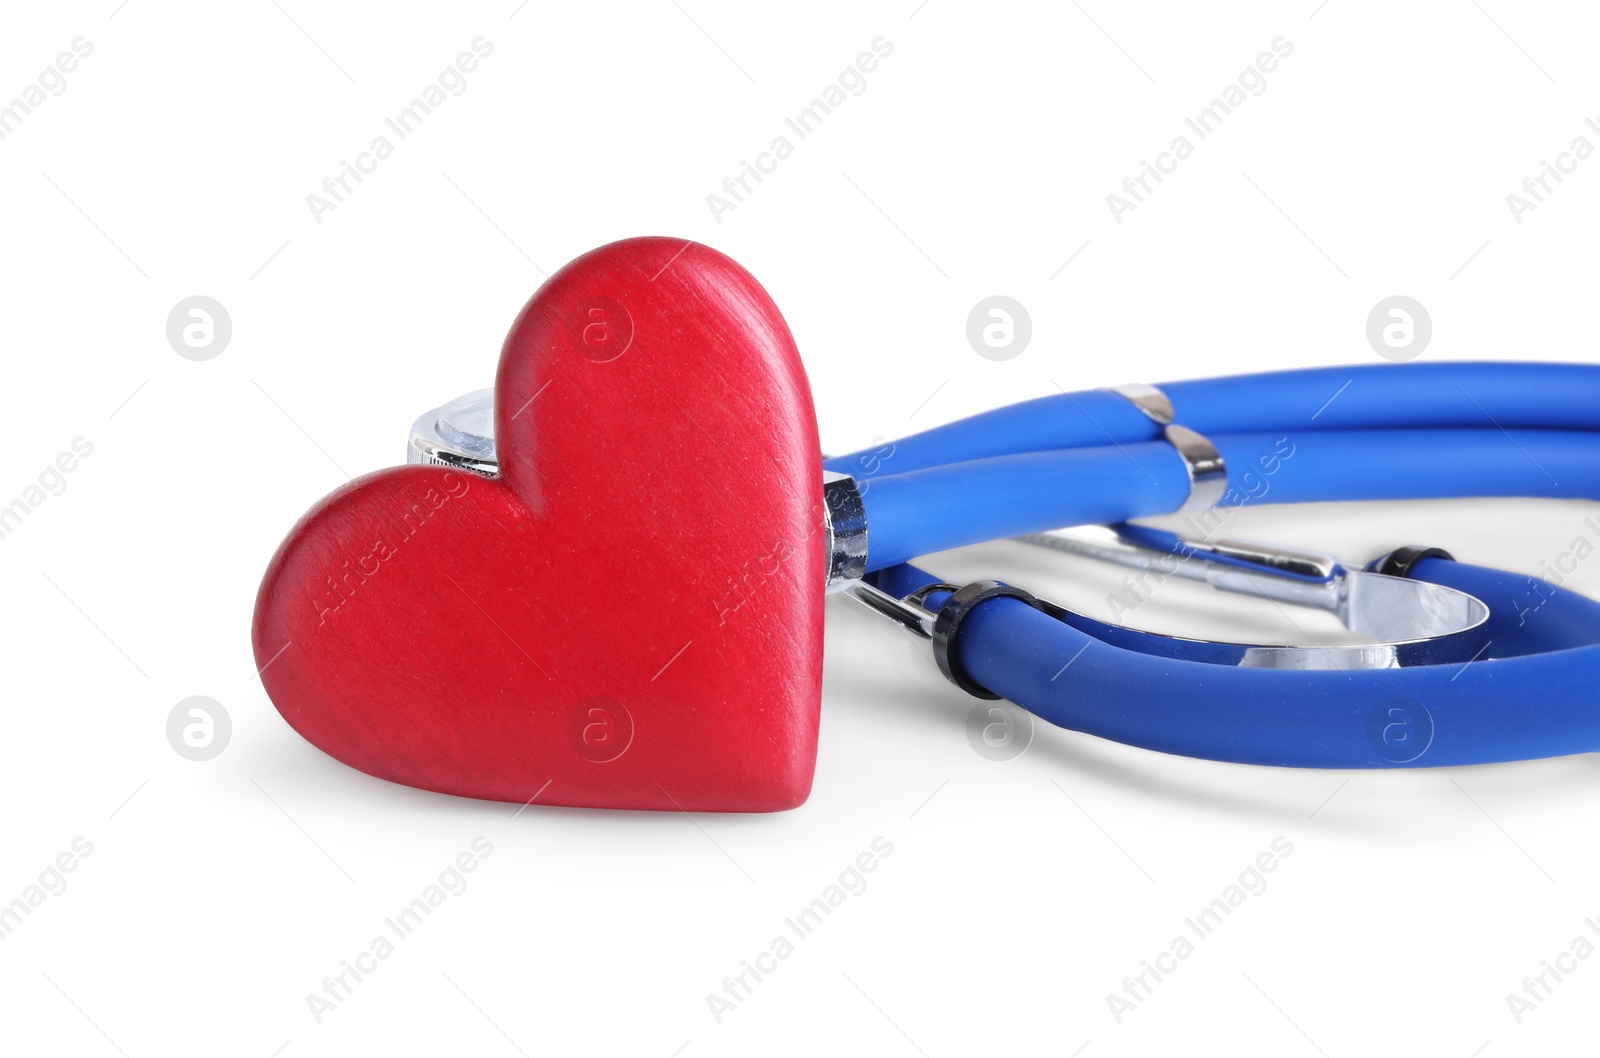 Photo of Stethoscope and red heart on wooden table against white background, space for text